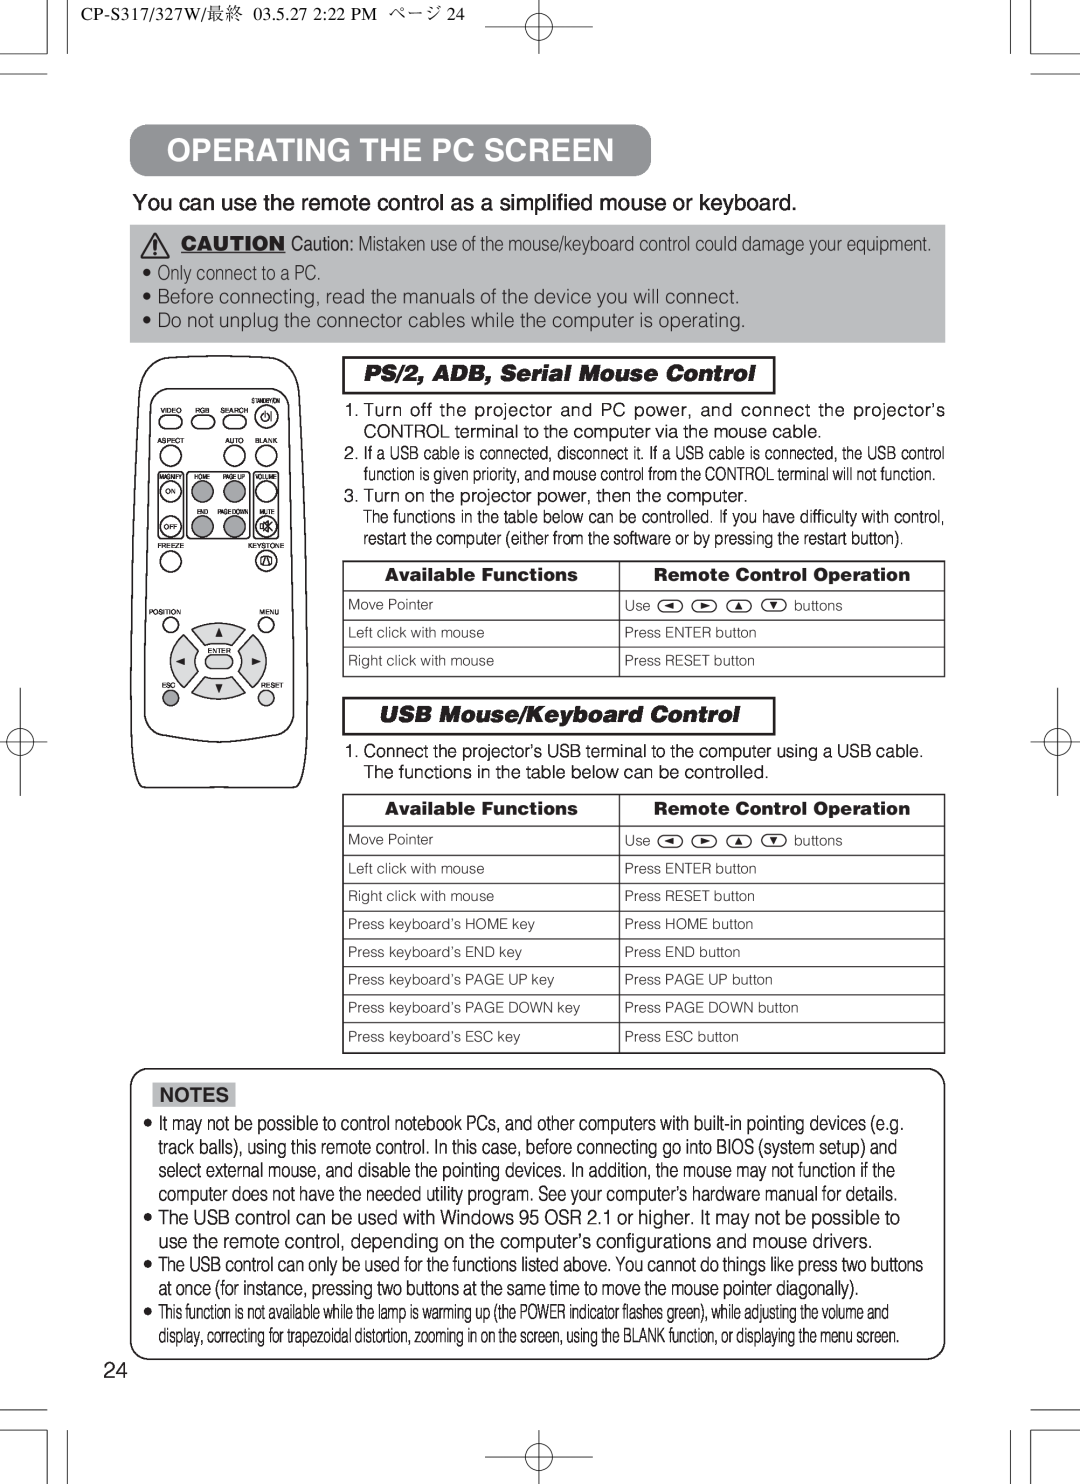 Hitachi cp-s318 user manual Operating The Pc Screen, You can use the remote control as a simplified mouse or keyboard 